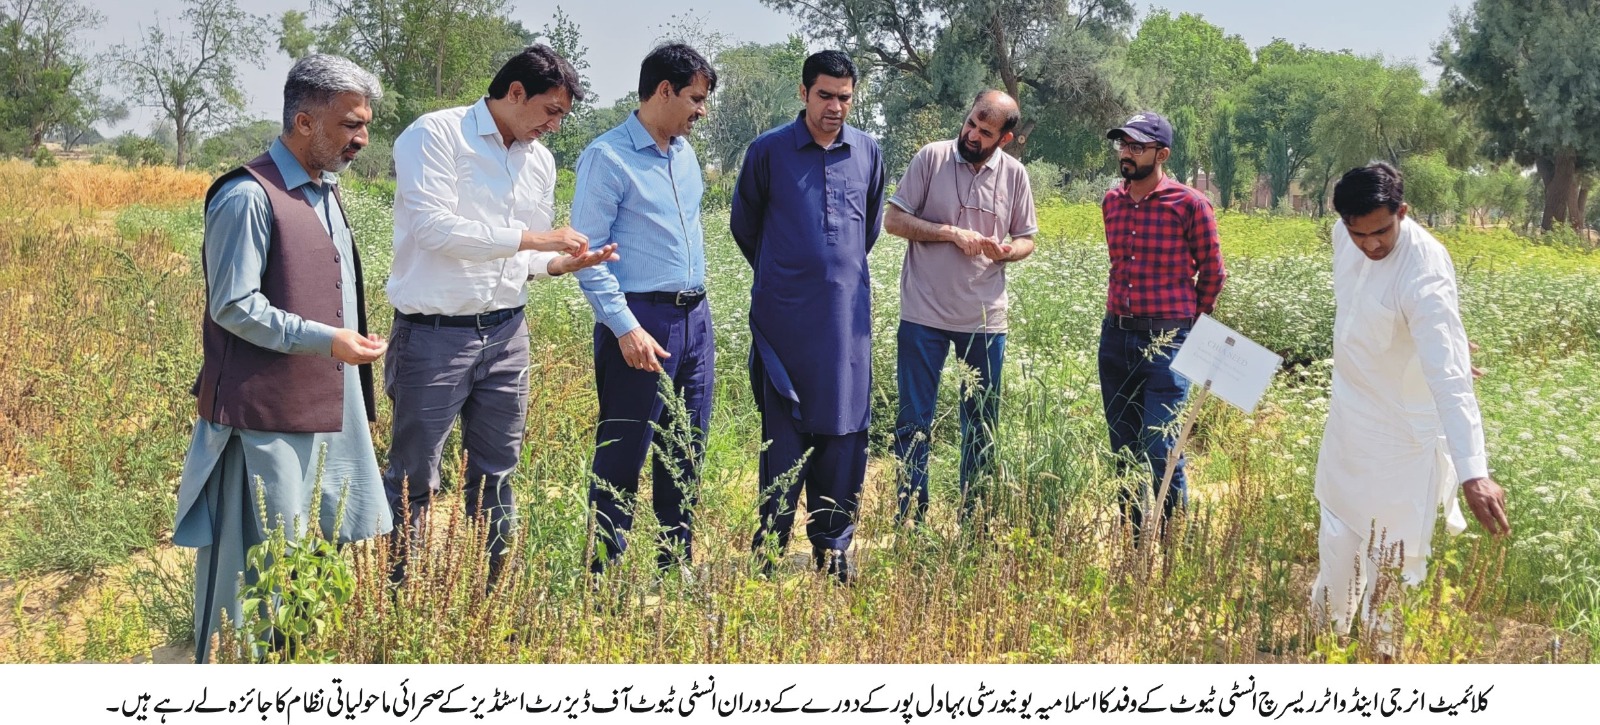 Climate Energy and Water Research Institute of National Agriculture Research Center visit IUB urdu 2